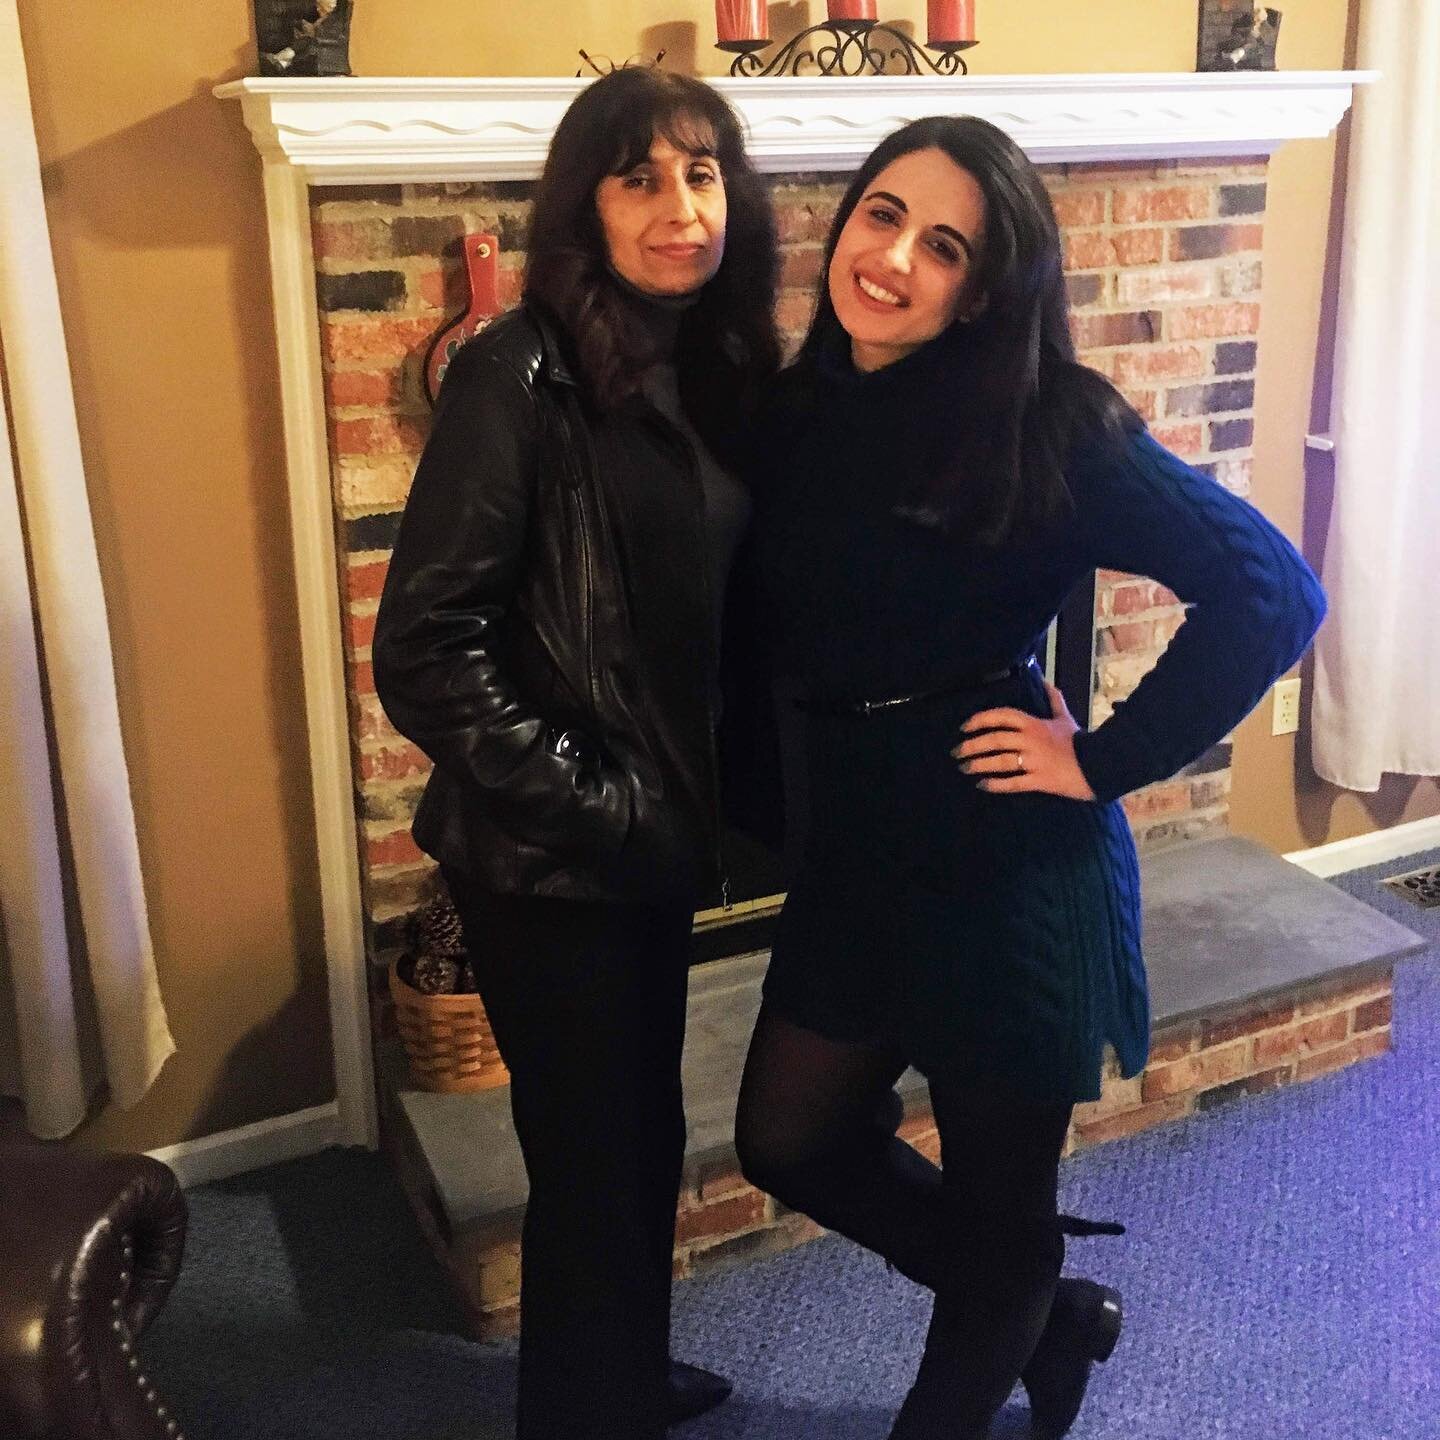 It&rsquo;s been a crazy past few weeks in our household and I hope to tell you about it soon! I&rsquo;ve been doing my best to be patient and practice gratitude, especially this week. 

This is a photo of my mom and I at Thanksgiving two years ago. I